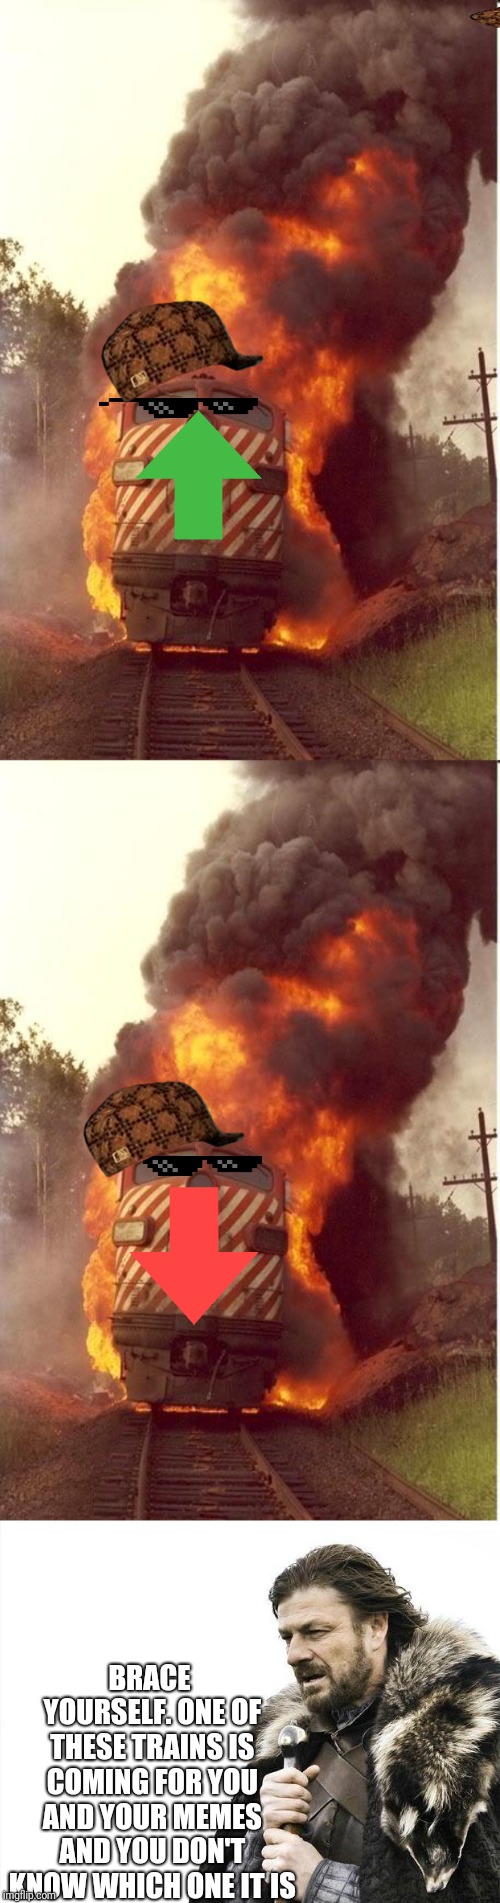 BRACE YOURSELF. ONE OF THESE TRAINS IS COMING FOR YOU AND YOUR MEMES AND YOU DON'T KNOW WHICH ONE IT IS | image tagged in memes,brace yourselves x is coming,train fire | made w/ Imgflip meme maker